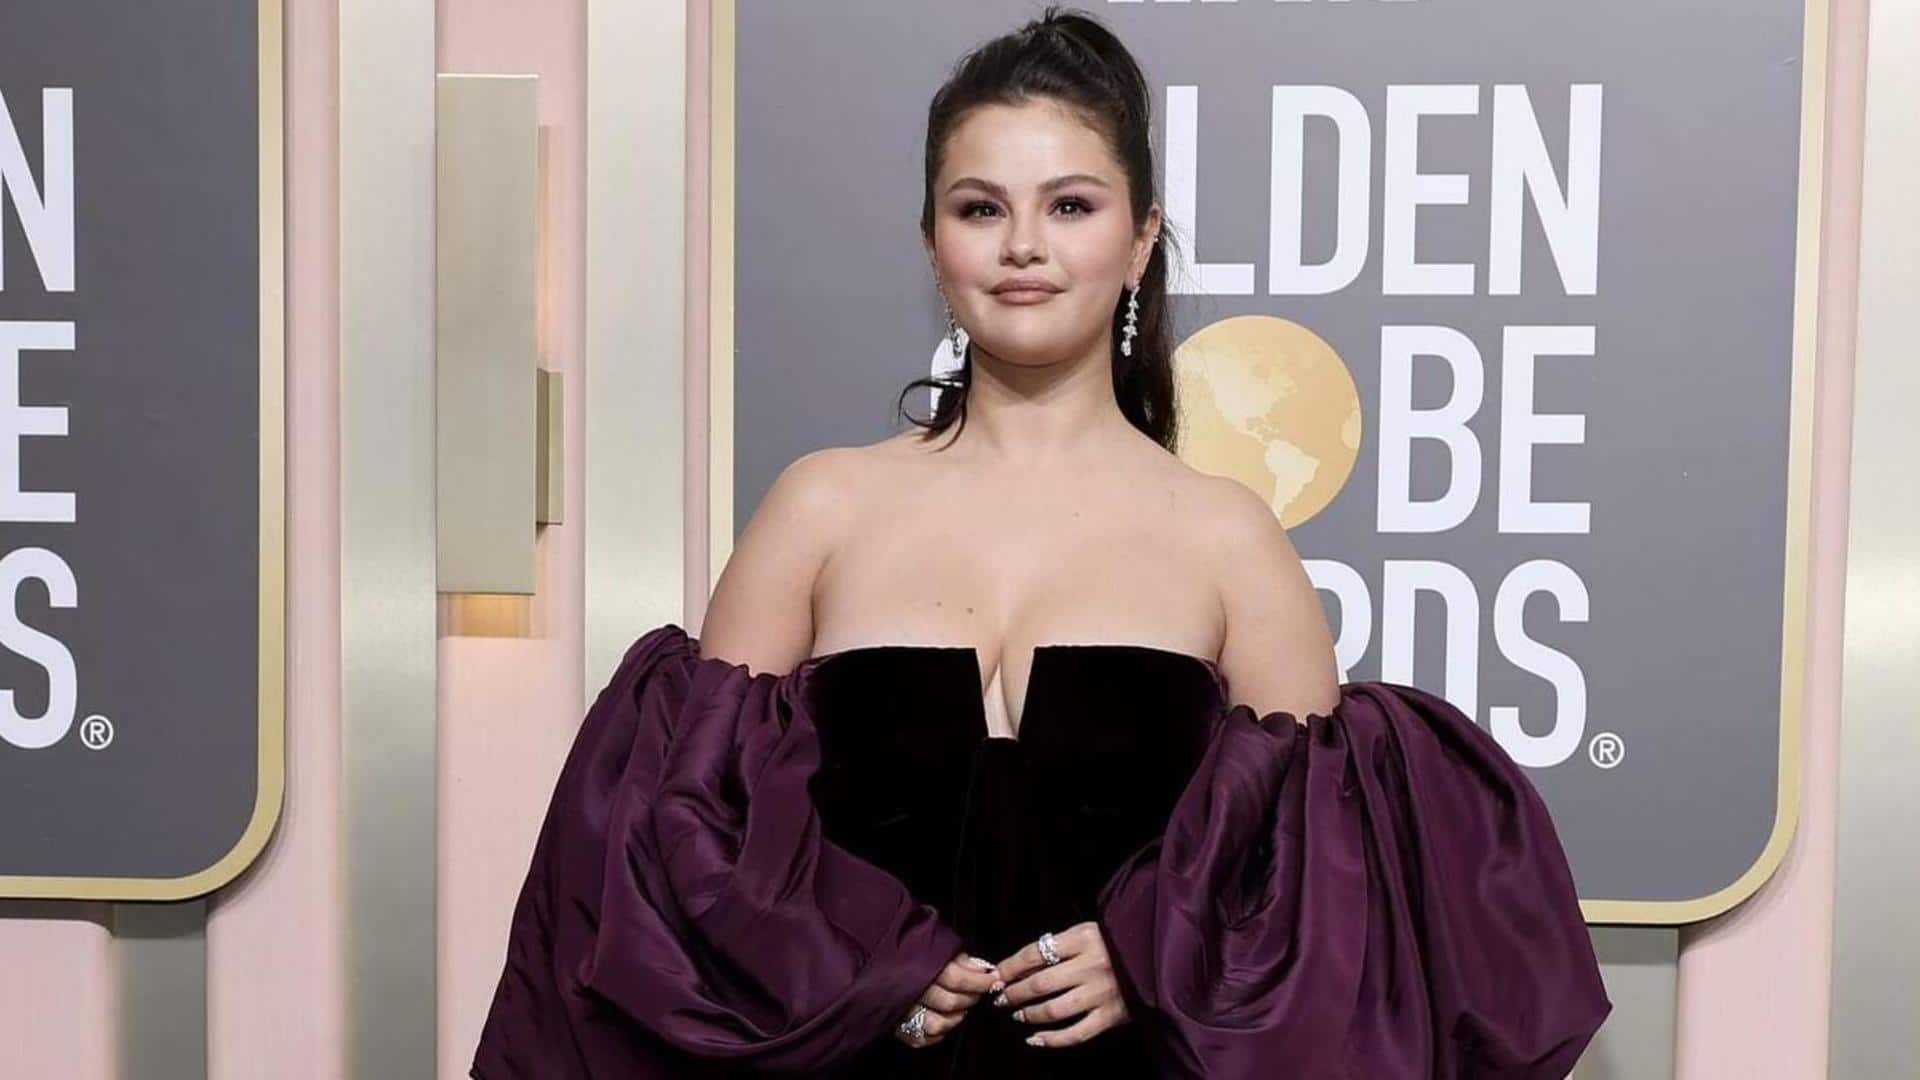 What is lupus that Selena Gomez has been diagnosed with